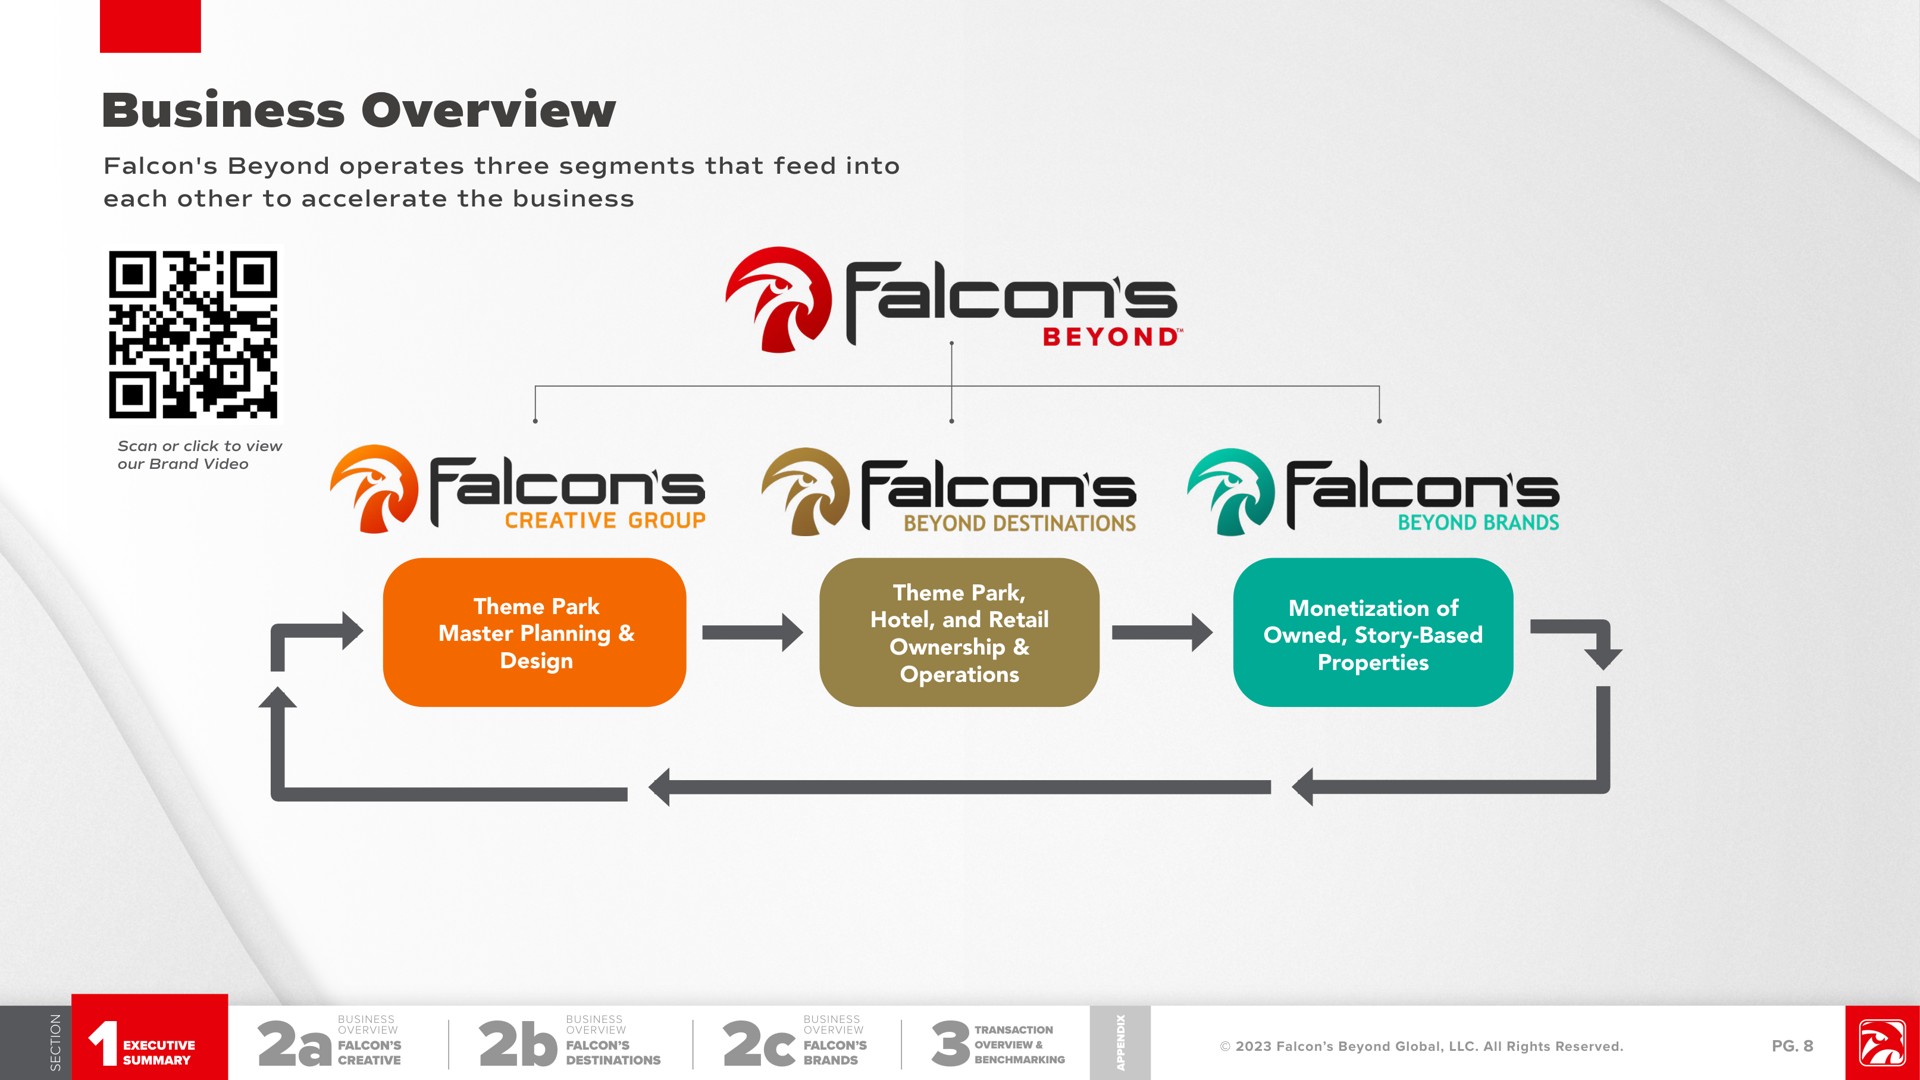 business overview falcon beyond operates three segments that feed into each other to accelerate the business alee falcons a falcons | Falcon's Beyond